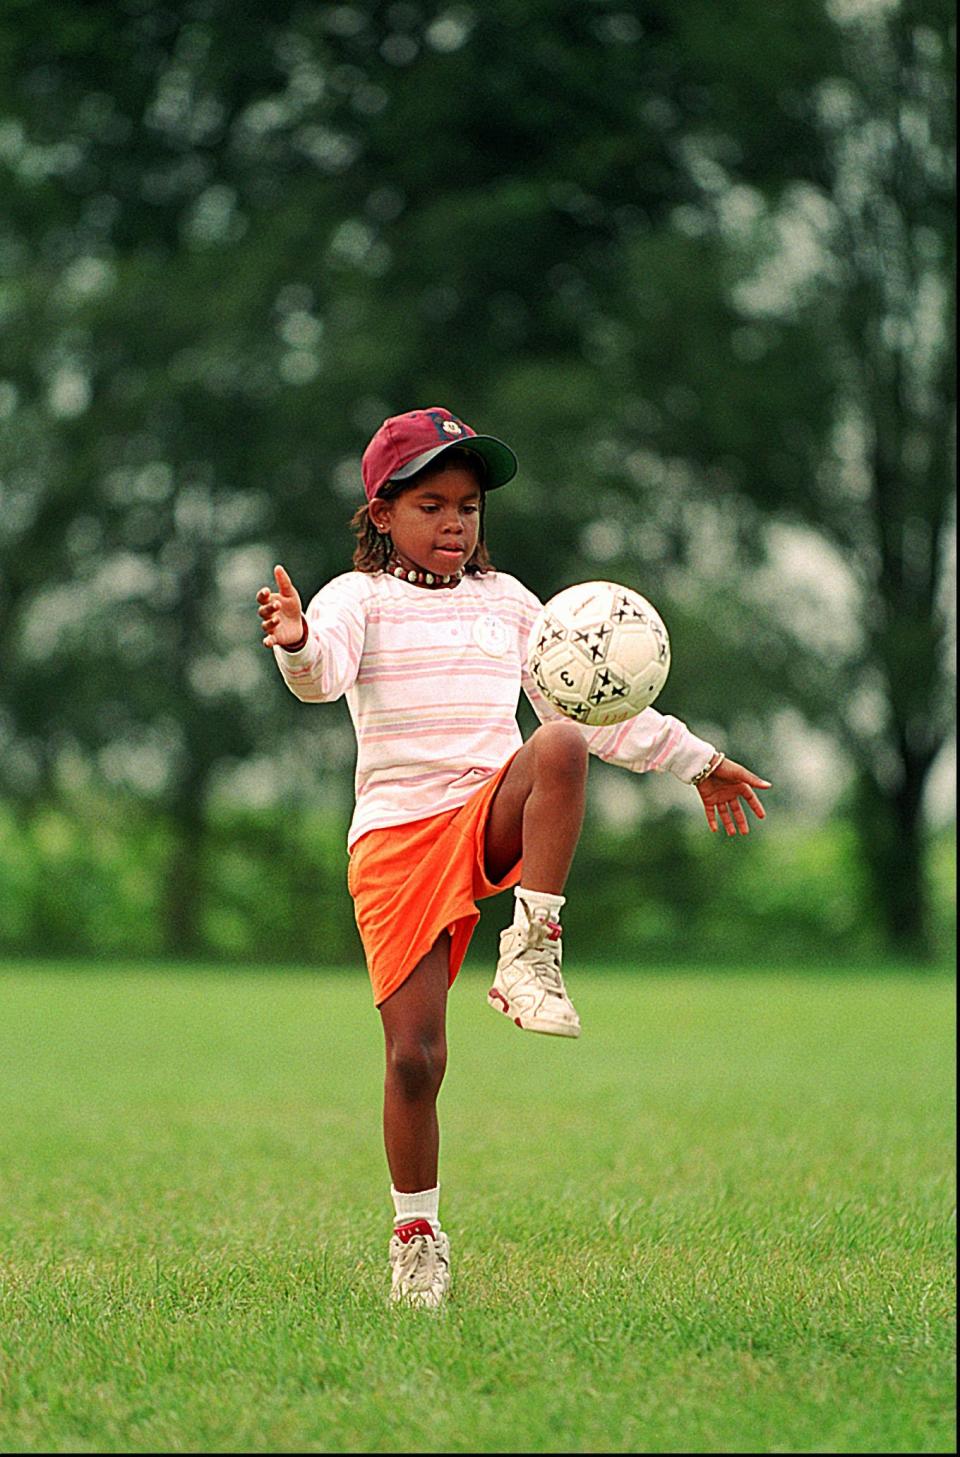 Hydeia Broadbent, 11, who is HIV positive, plays soccer at Camp Heartland in Woodstock, Ill.